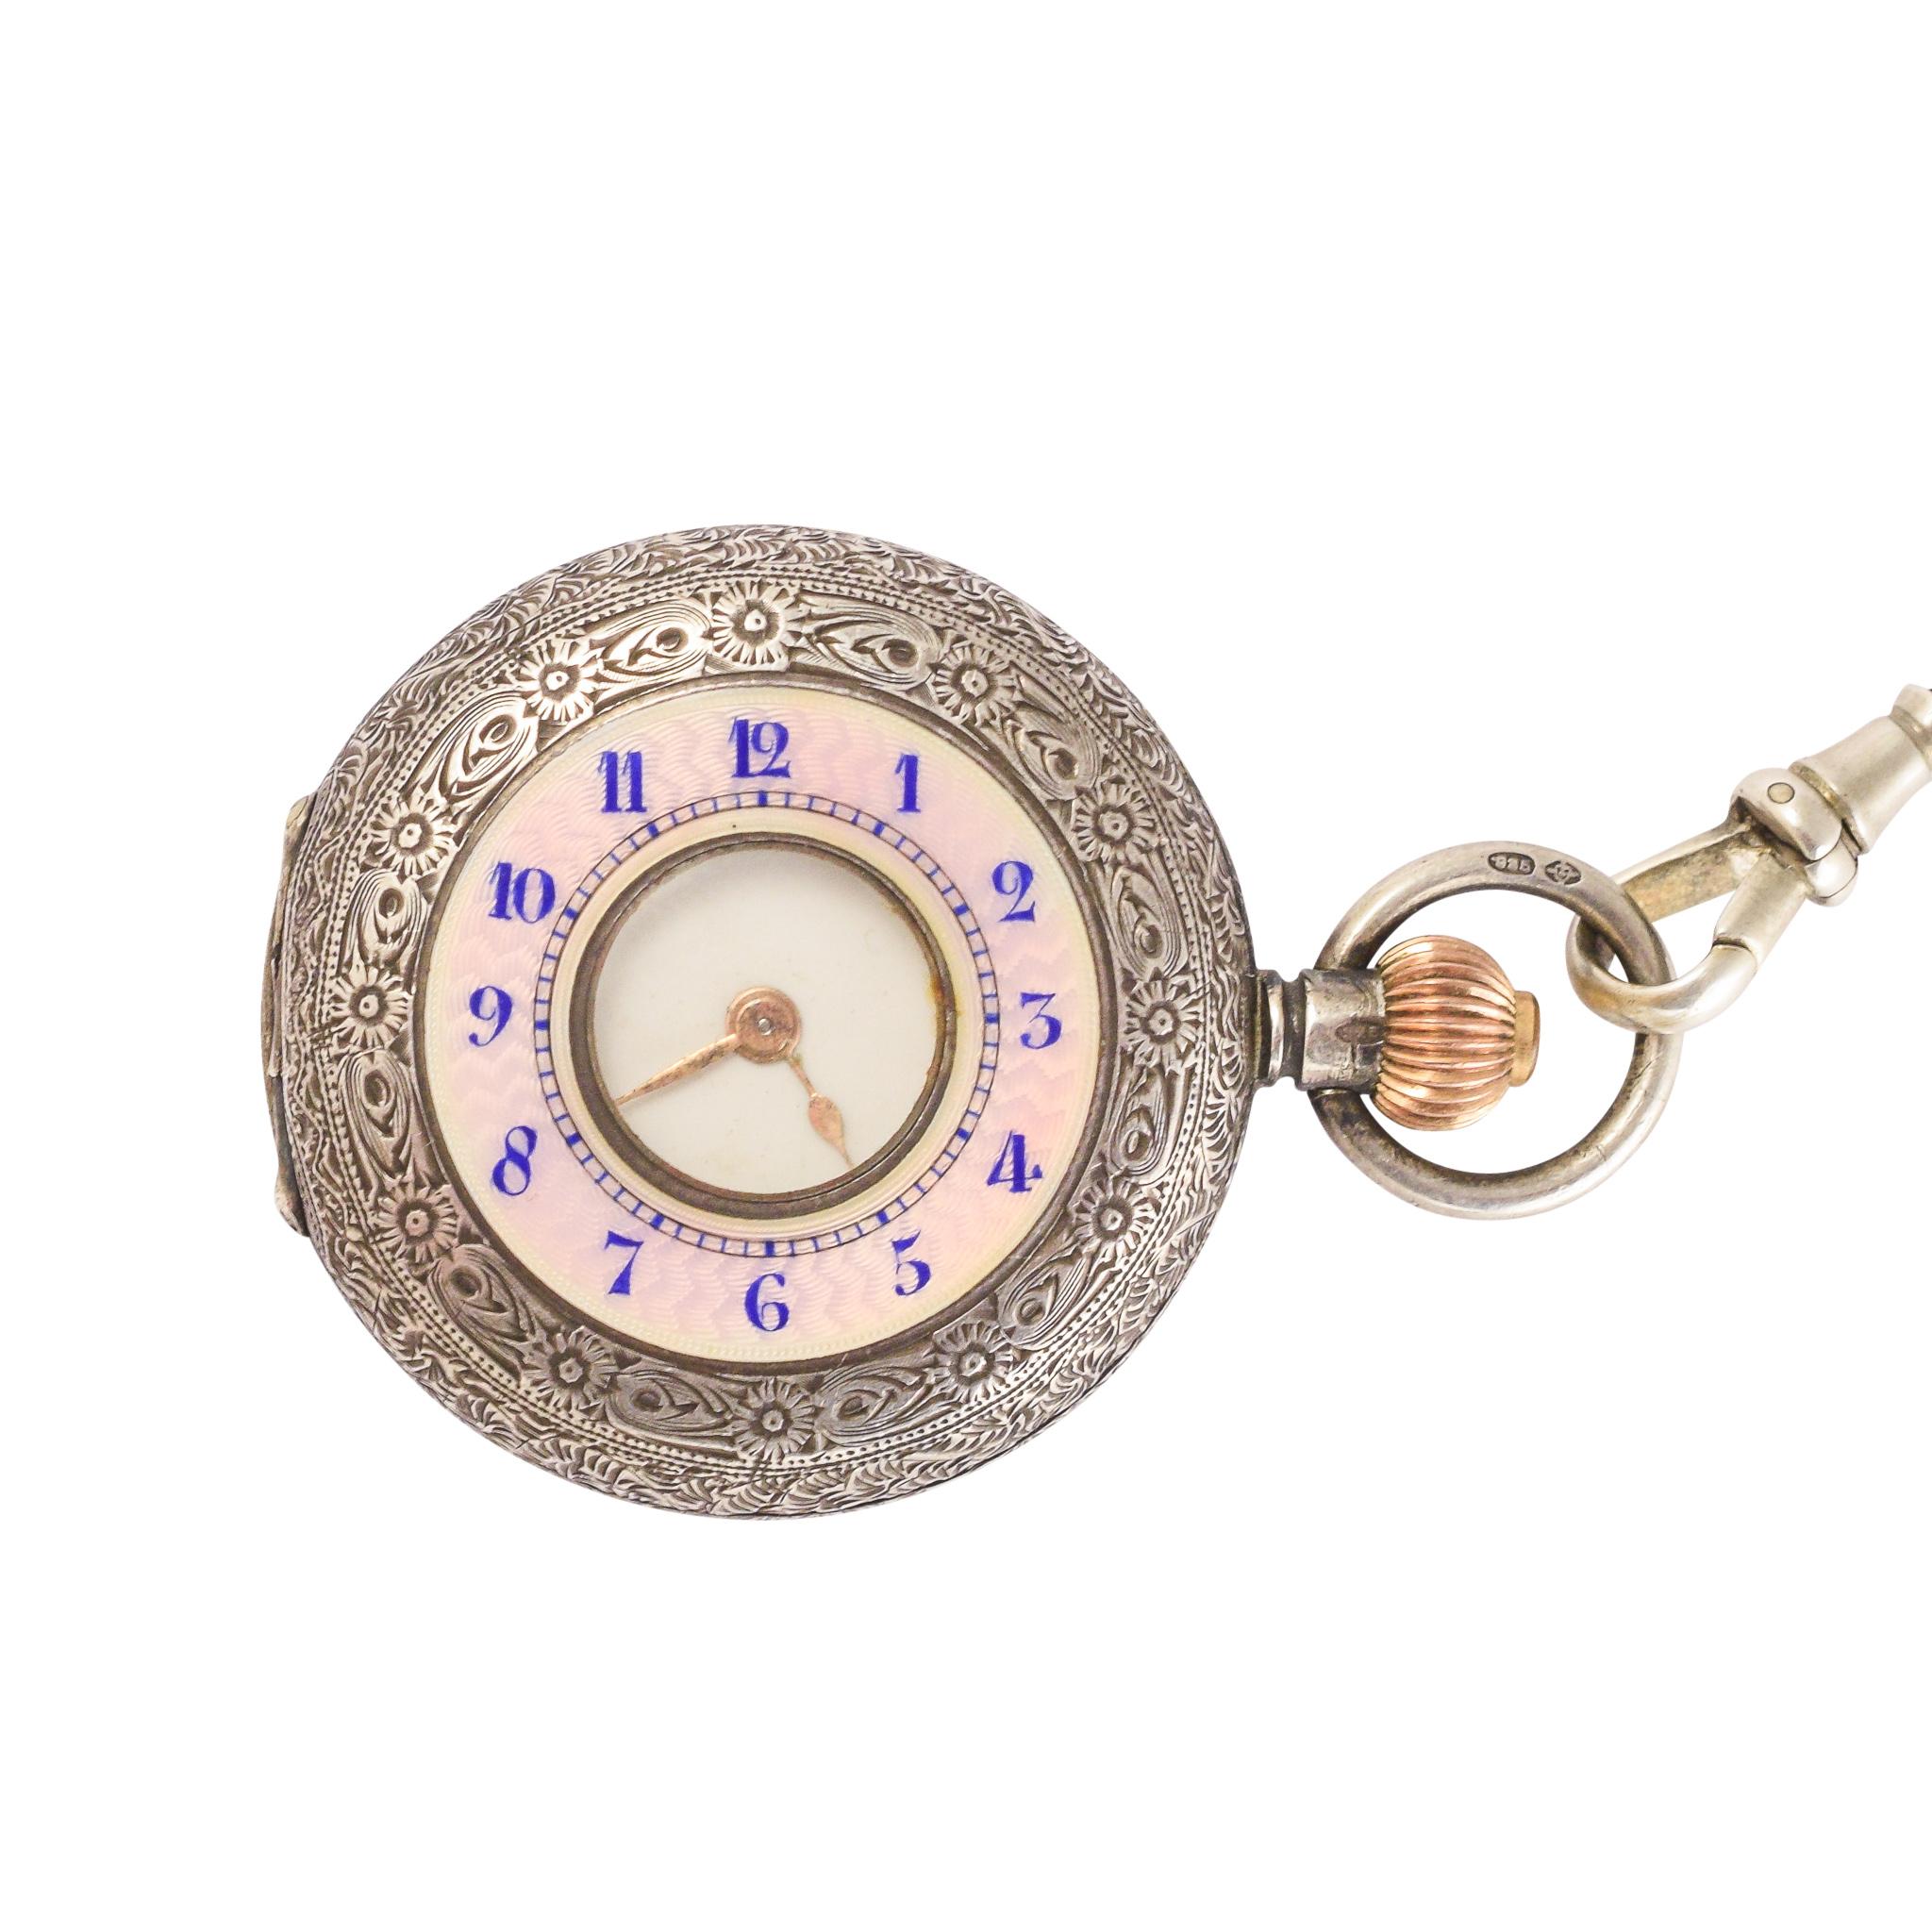 A cute half hunter pocket watch and albertina chain dating from the early 20th Century, circa 1919. The front features beautiful pink guilloché enameling with blue numbers and, of course, a small window to tell the time when it's closed. Both the